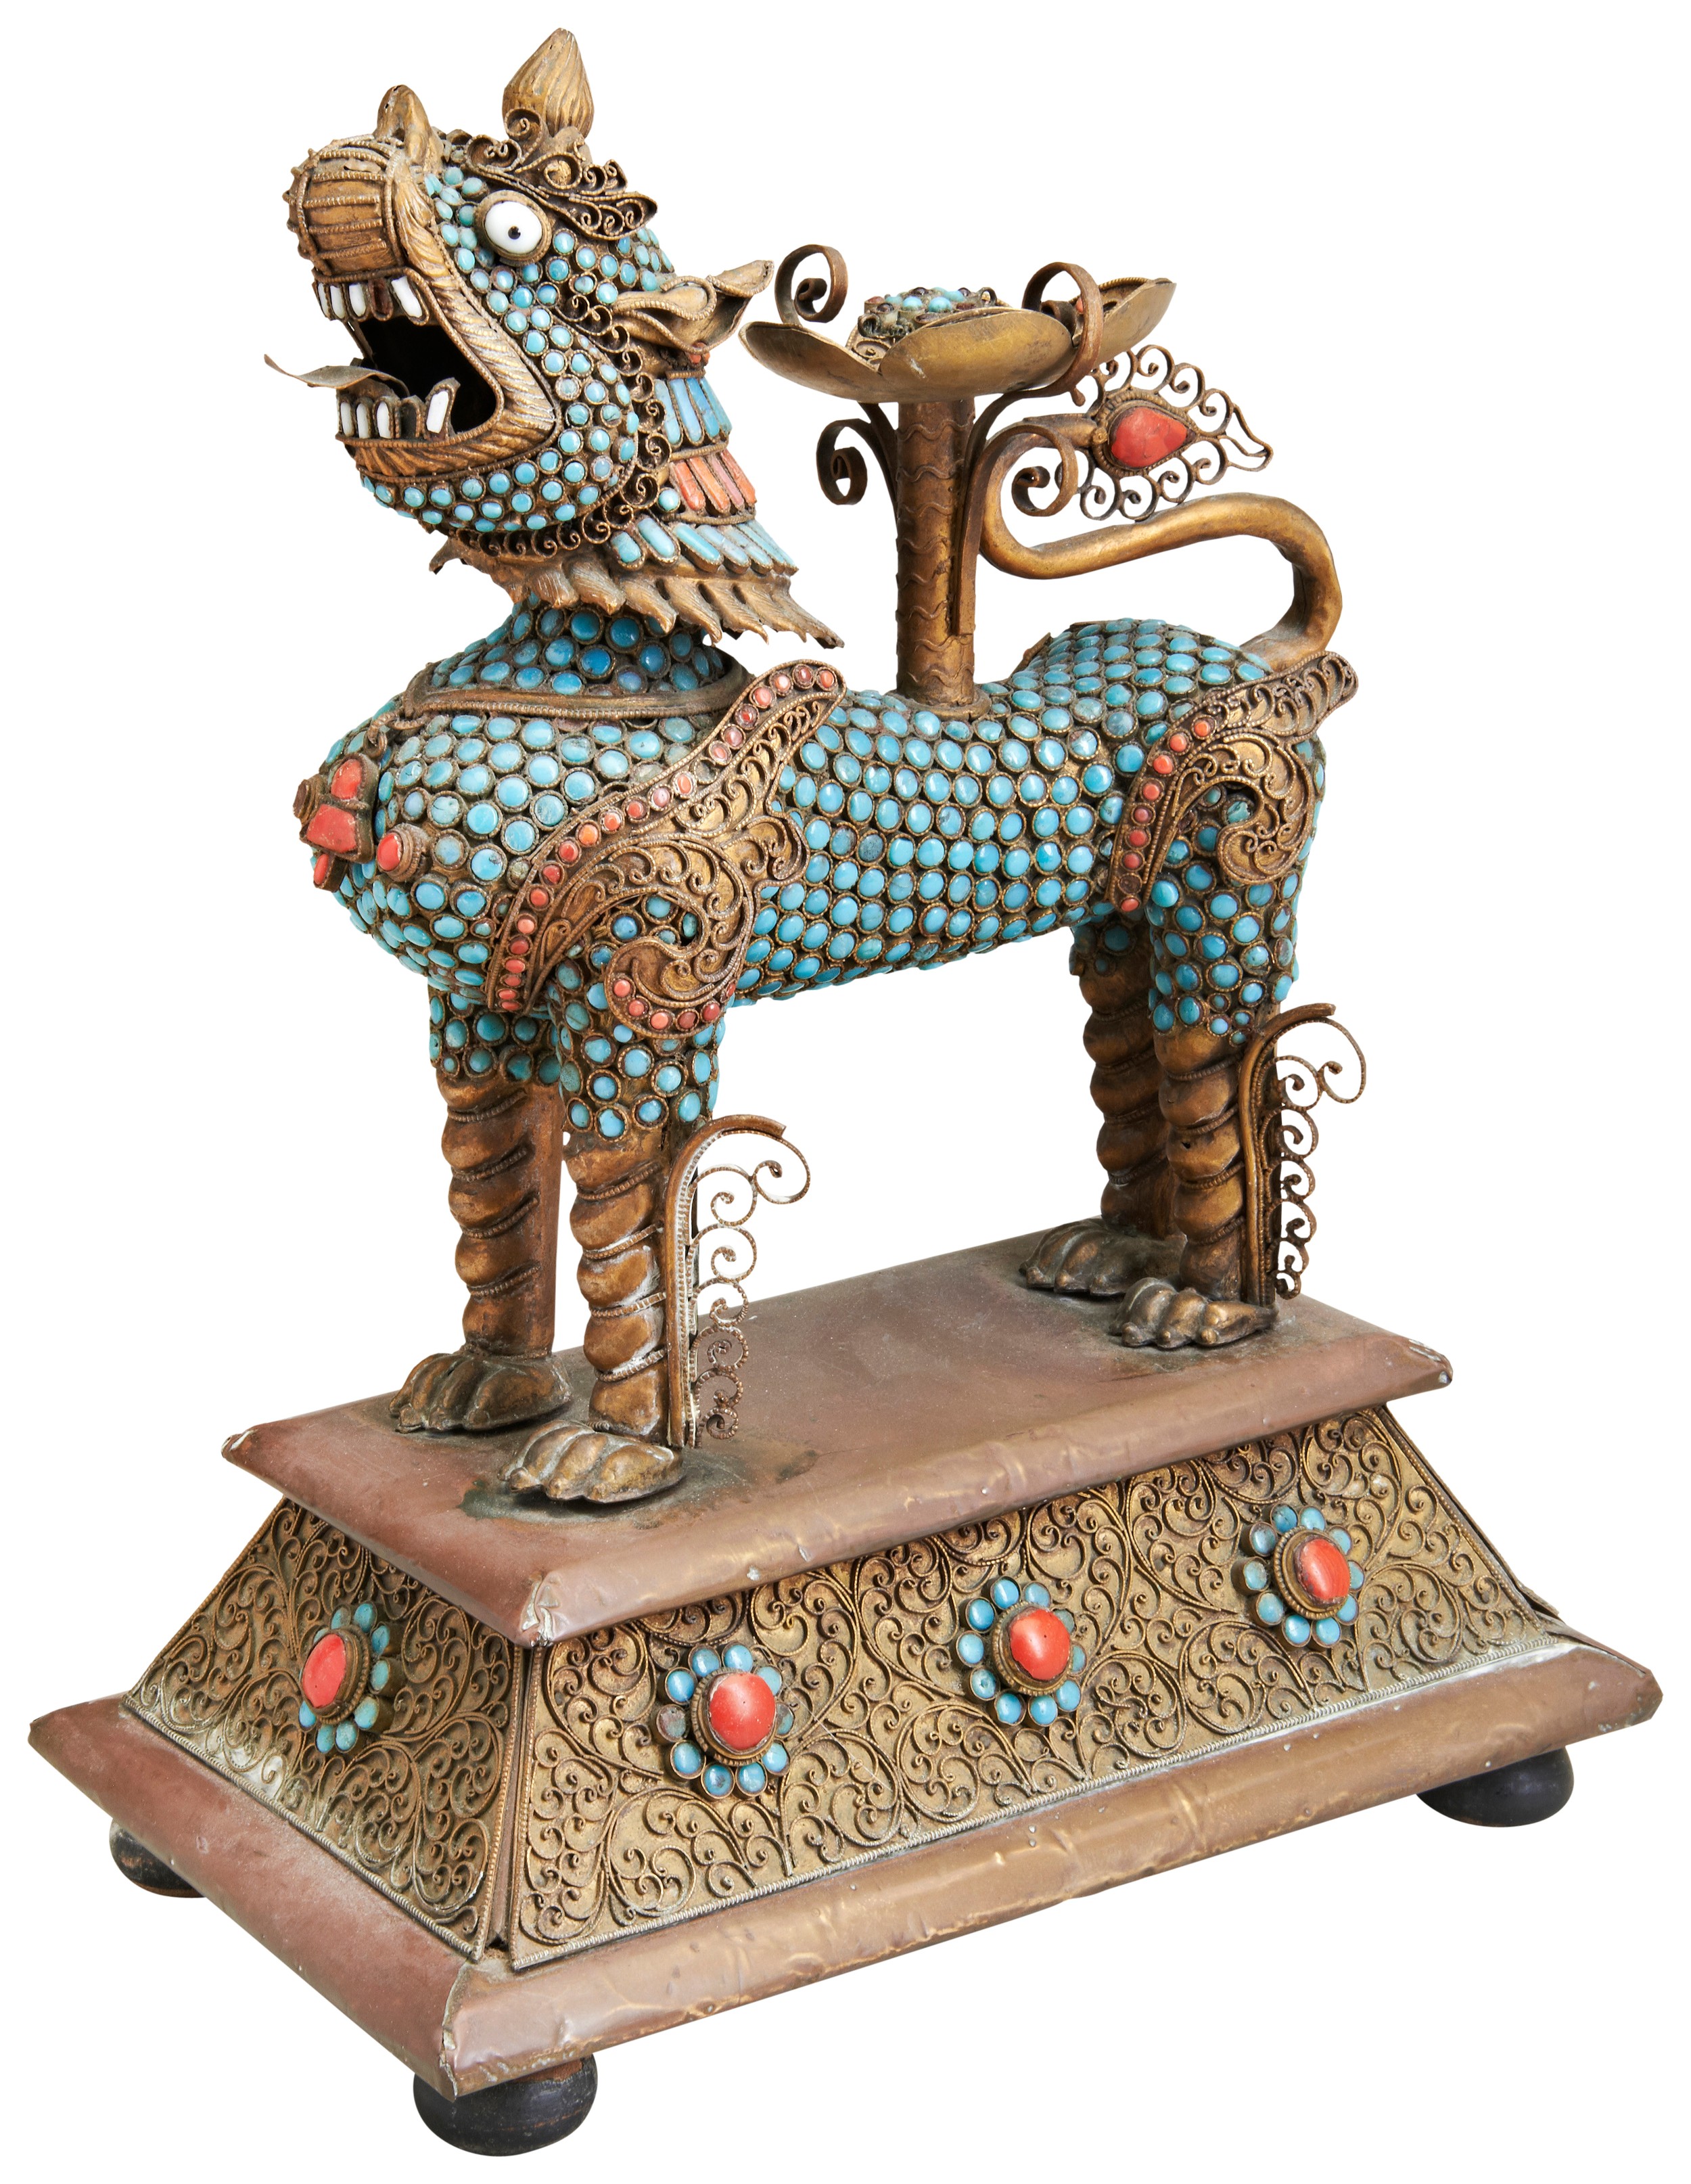 A GILT-METAL, TURQUOISE AND CORAL BUDDHIST LION VESSEL TIBET, 20TH CENTURY the beast standing four